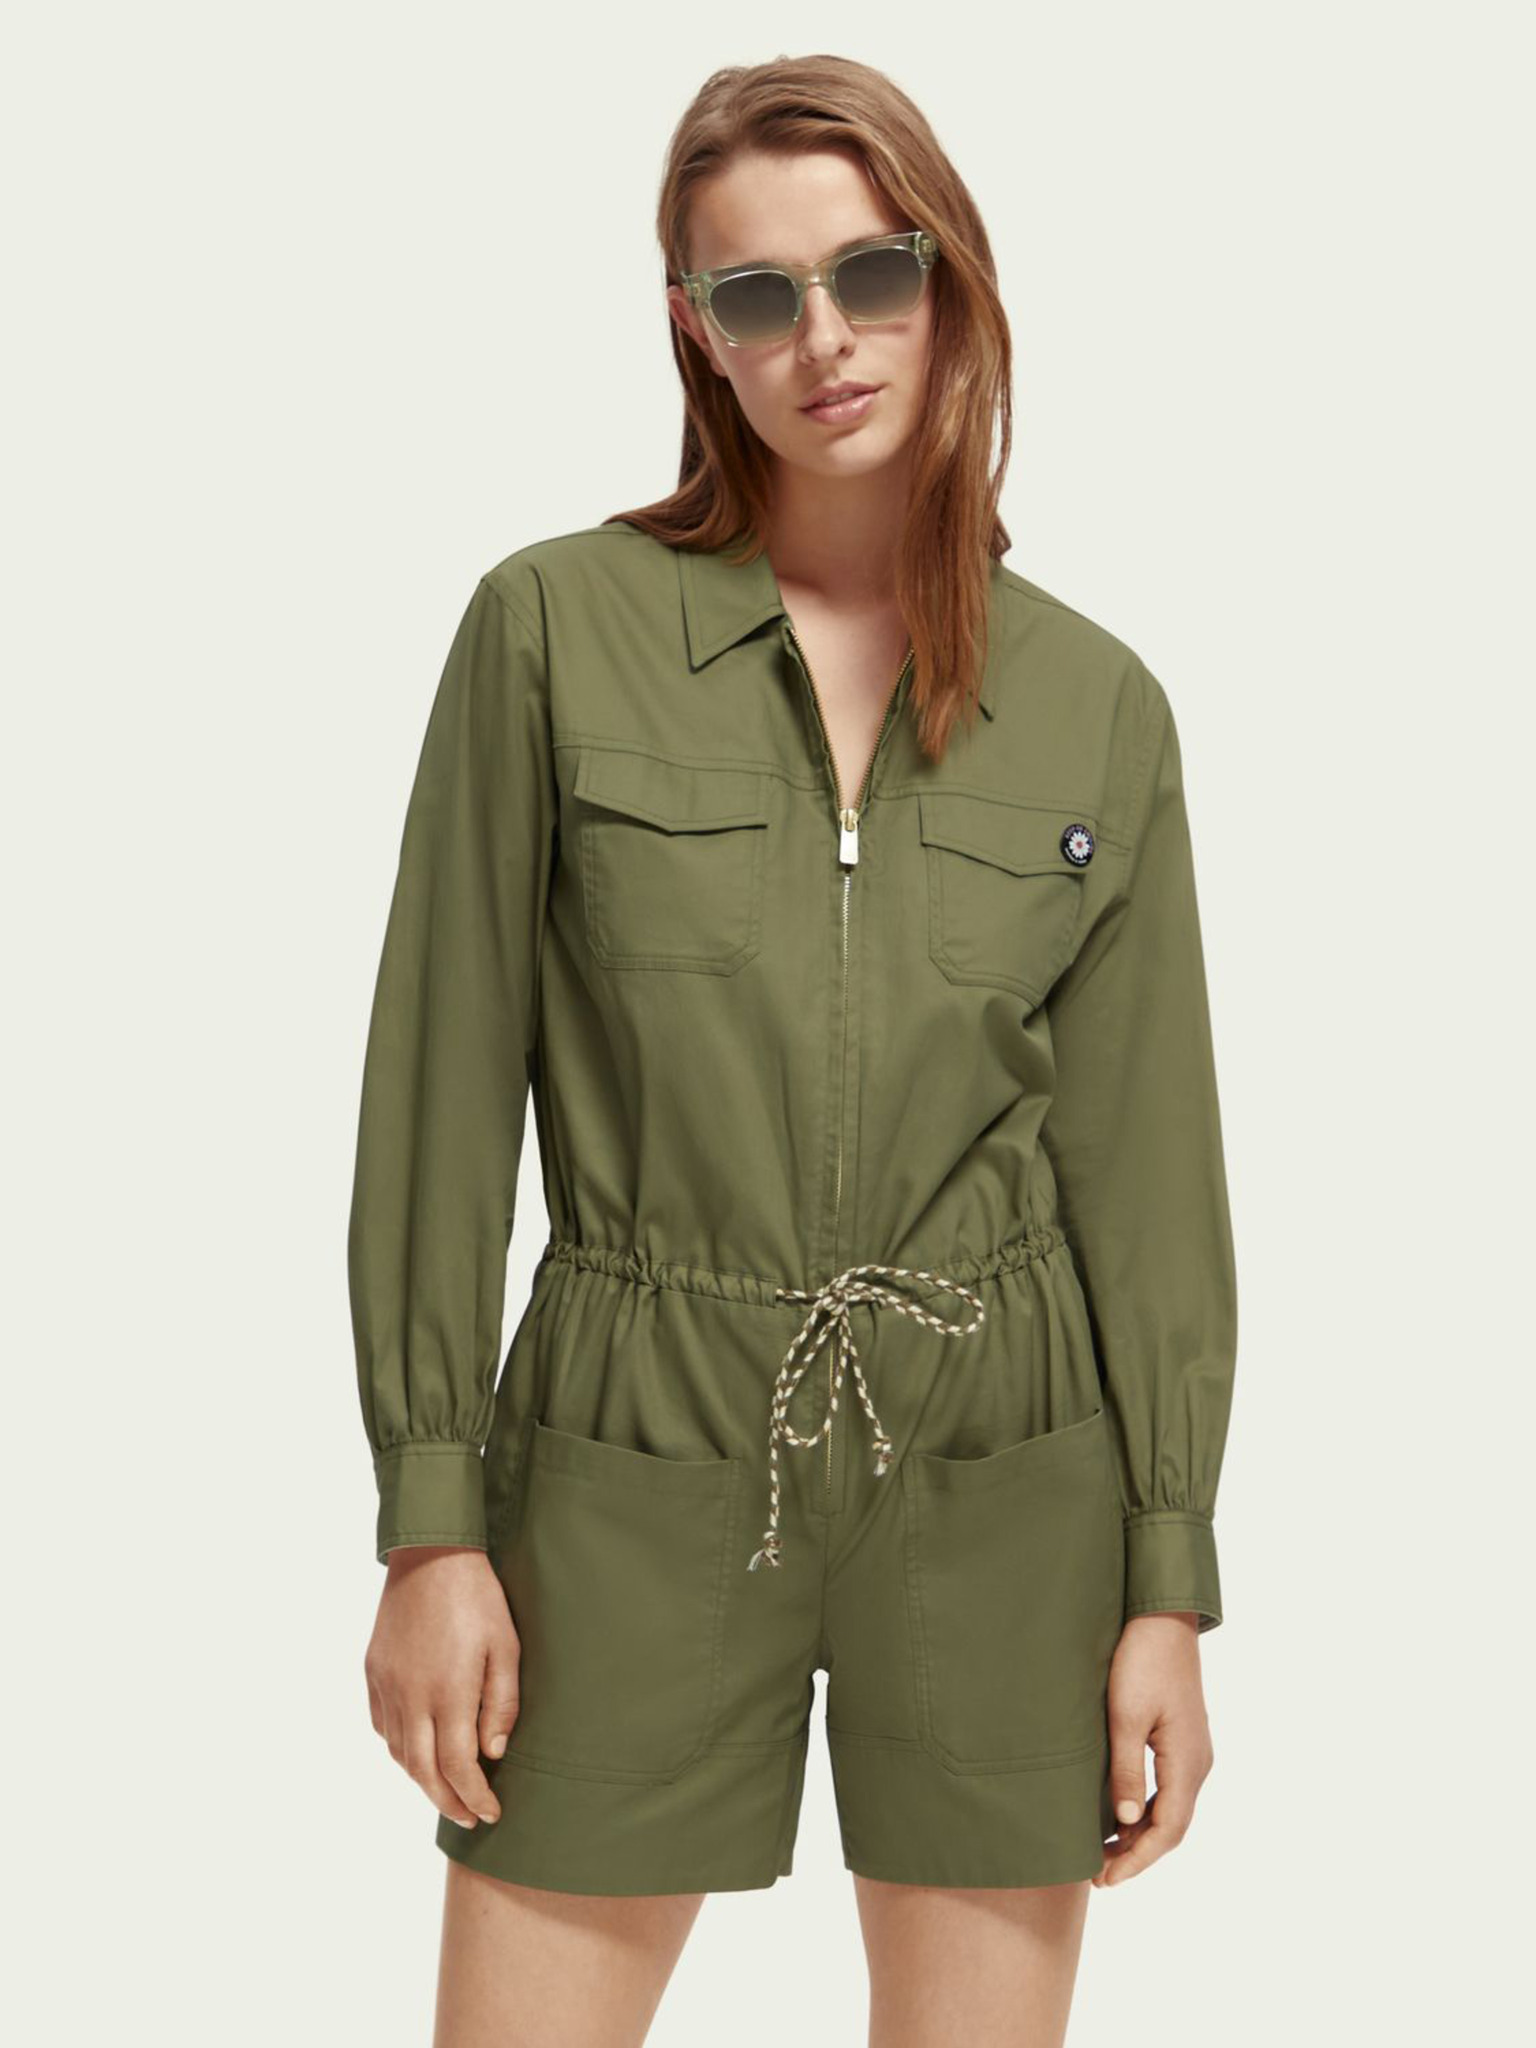 Floral Utility Jumpsuit by Scotch & Soda for $45